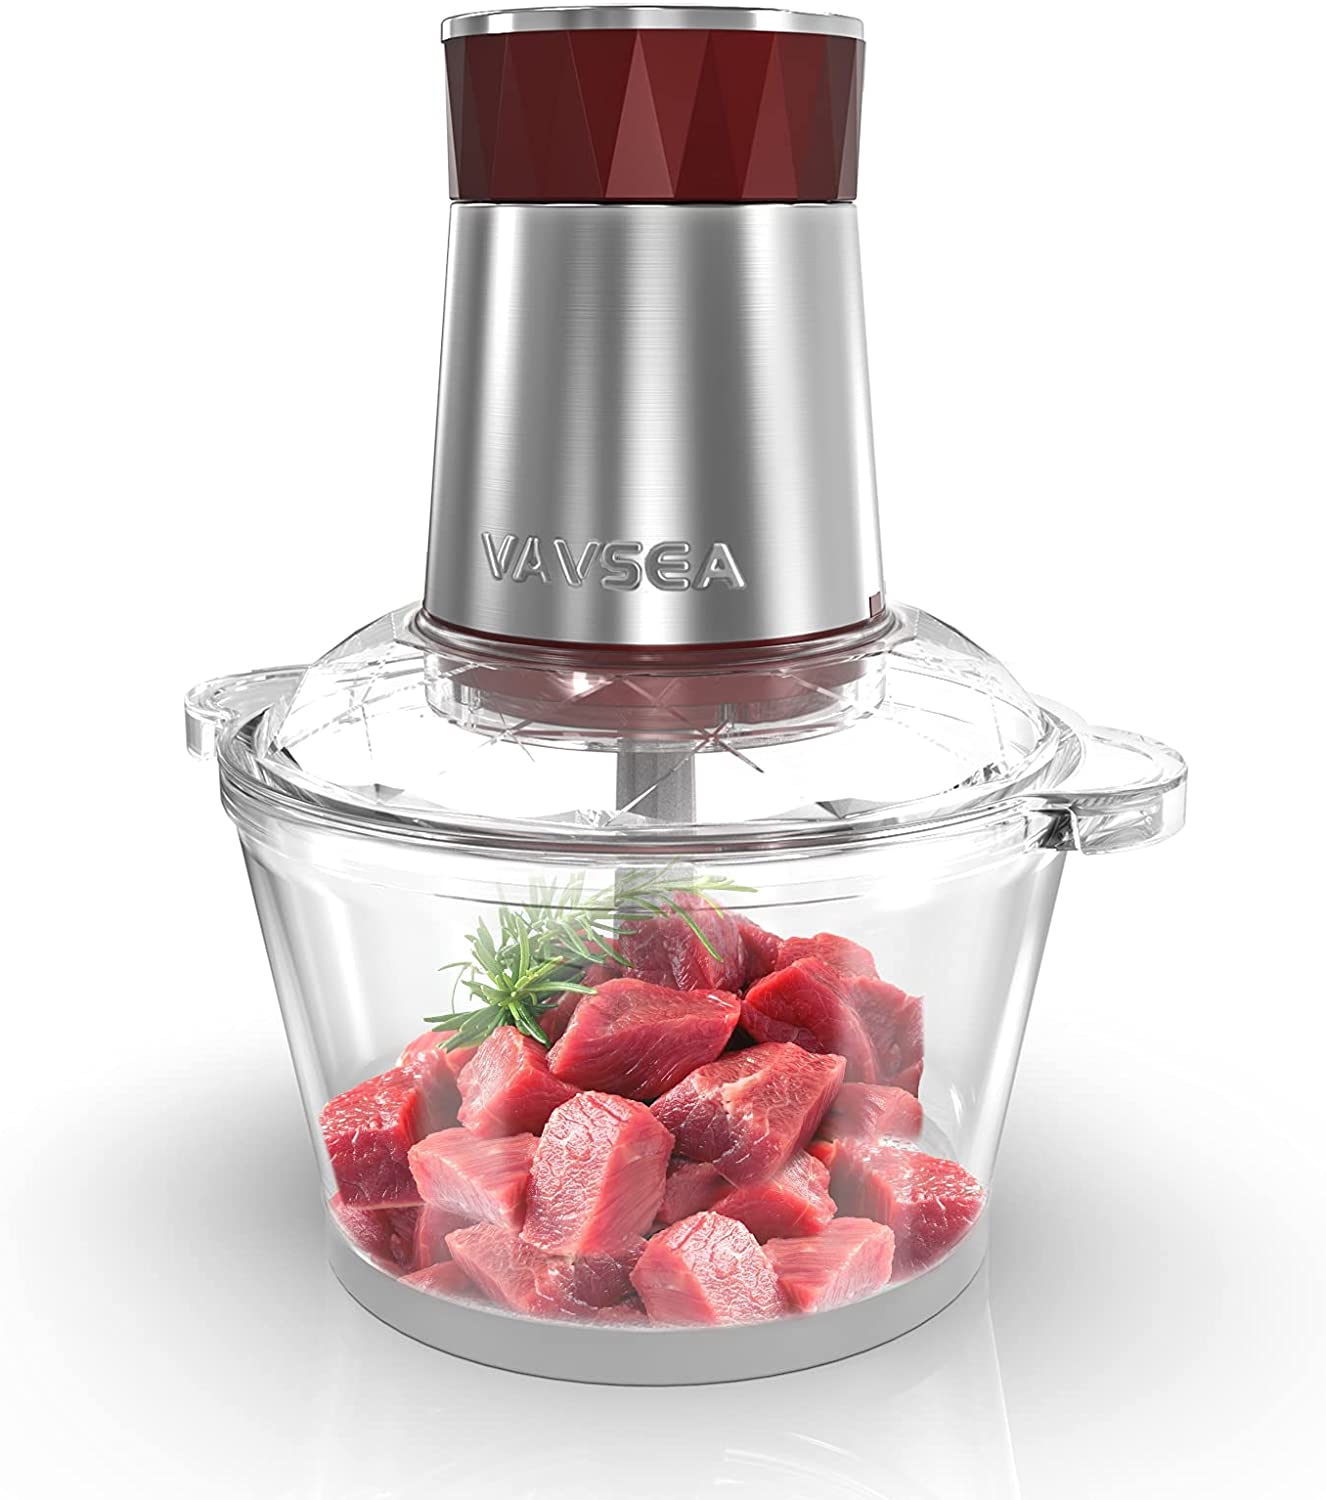 VAVSEA Universal Chopper Electric with 2 L Glass Container, 500 W Electric Multi Chopper with 2 Speed Levels, Meat Grinder with 4 Blades for Meat, Onions, Fruit, Vegetables